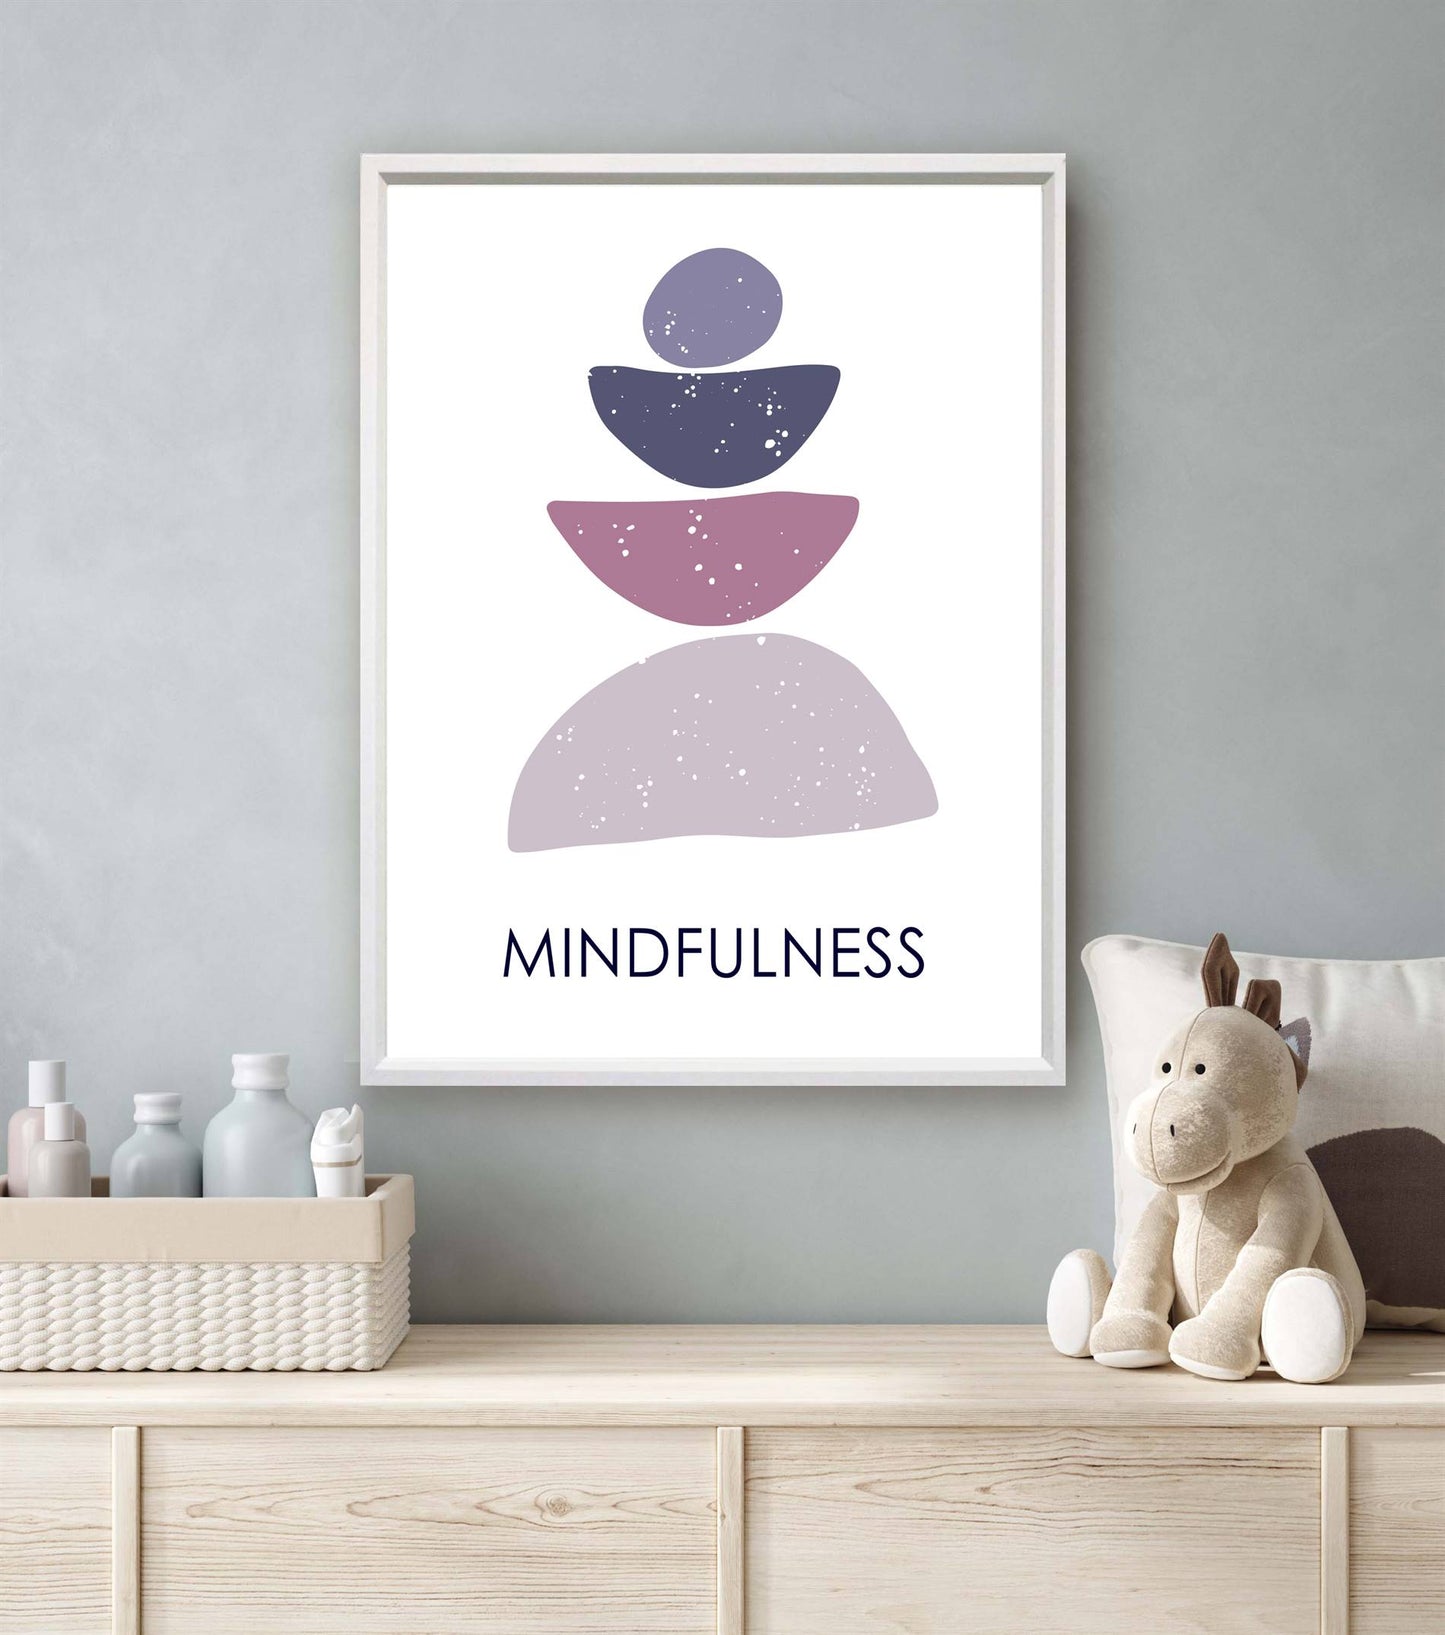 Mindfulness Mindfulness / Concentreren - Mindfulness / Abstract